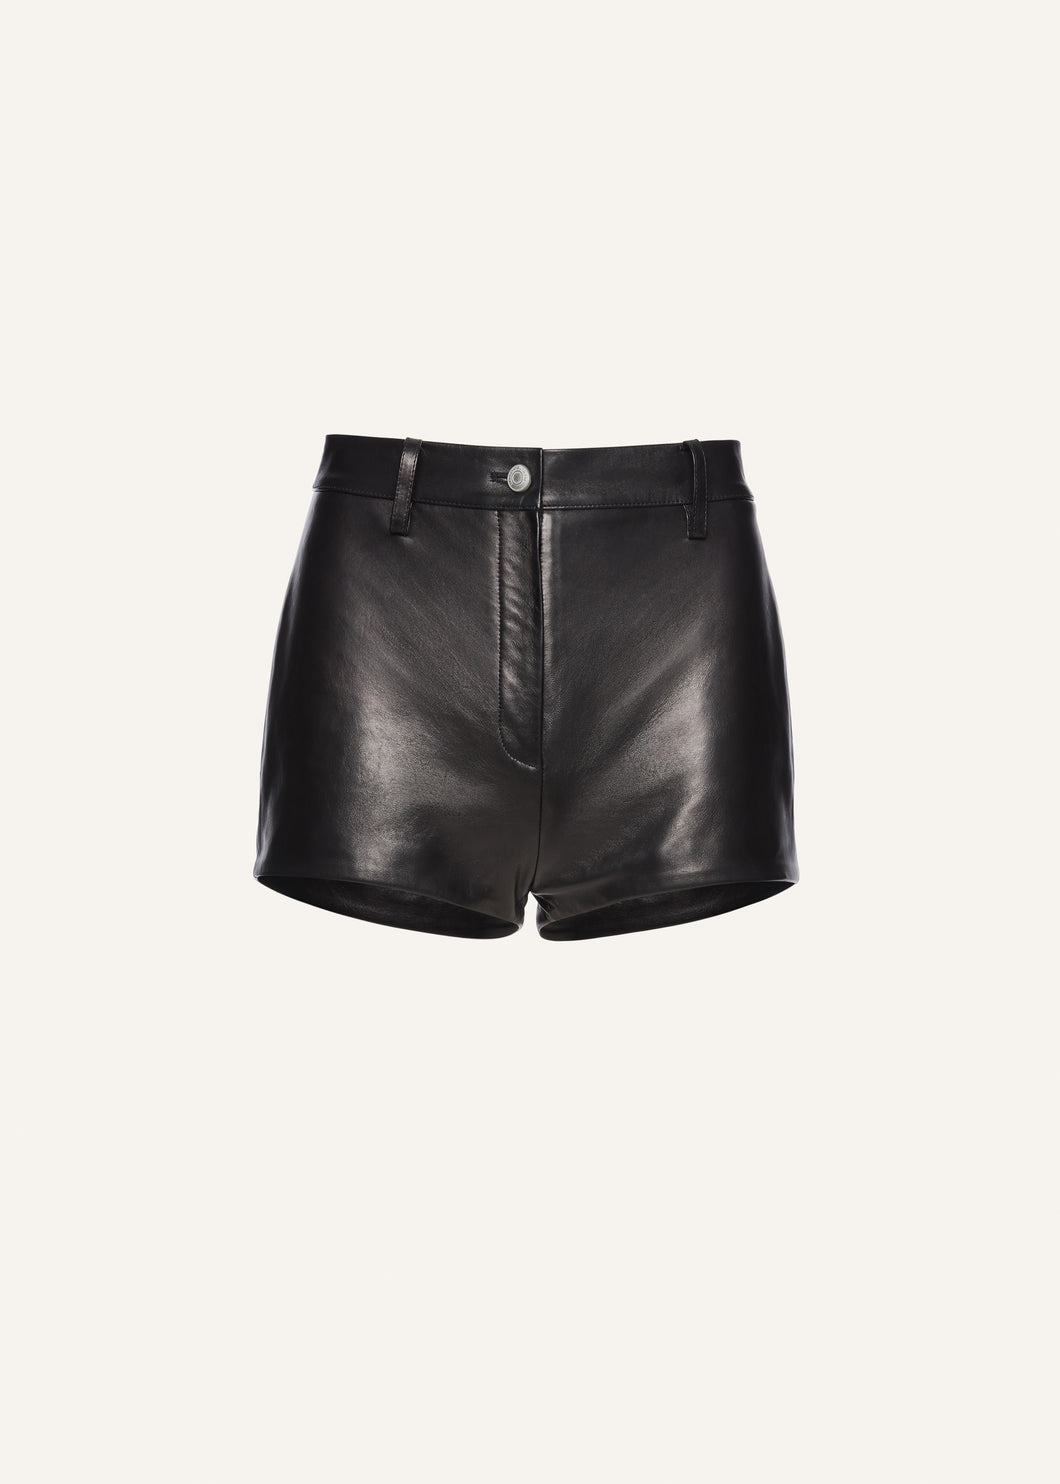 Leather hot shorts in black